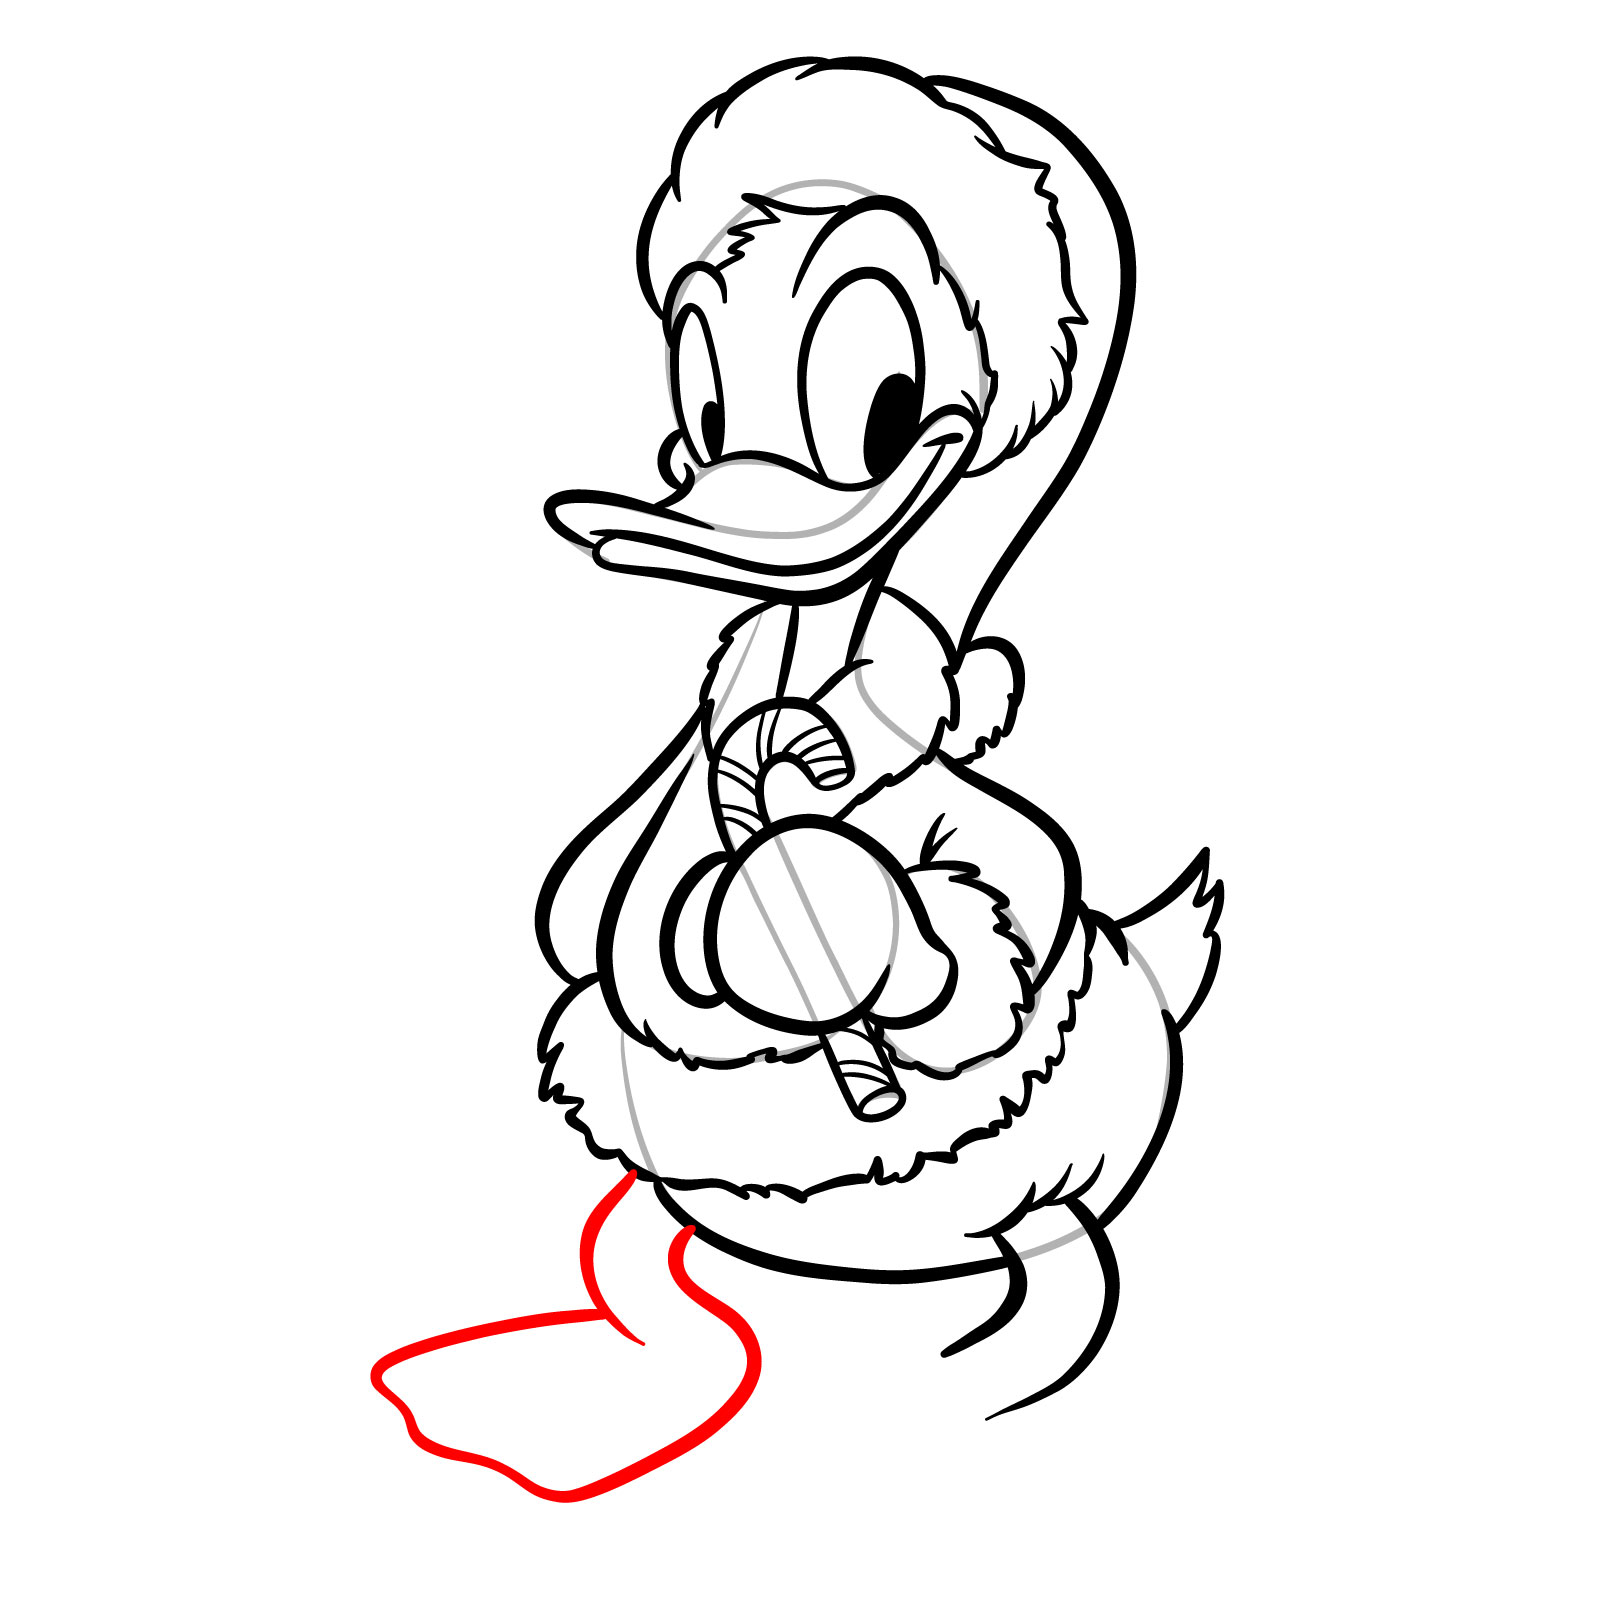 How to Draw Christmas Donald Duck - step 21